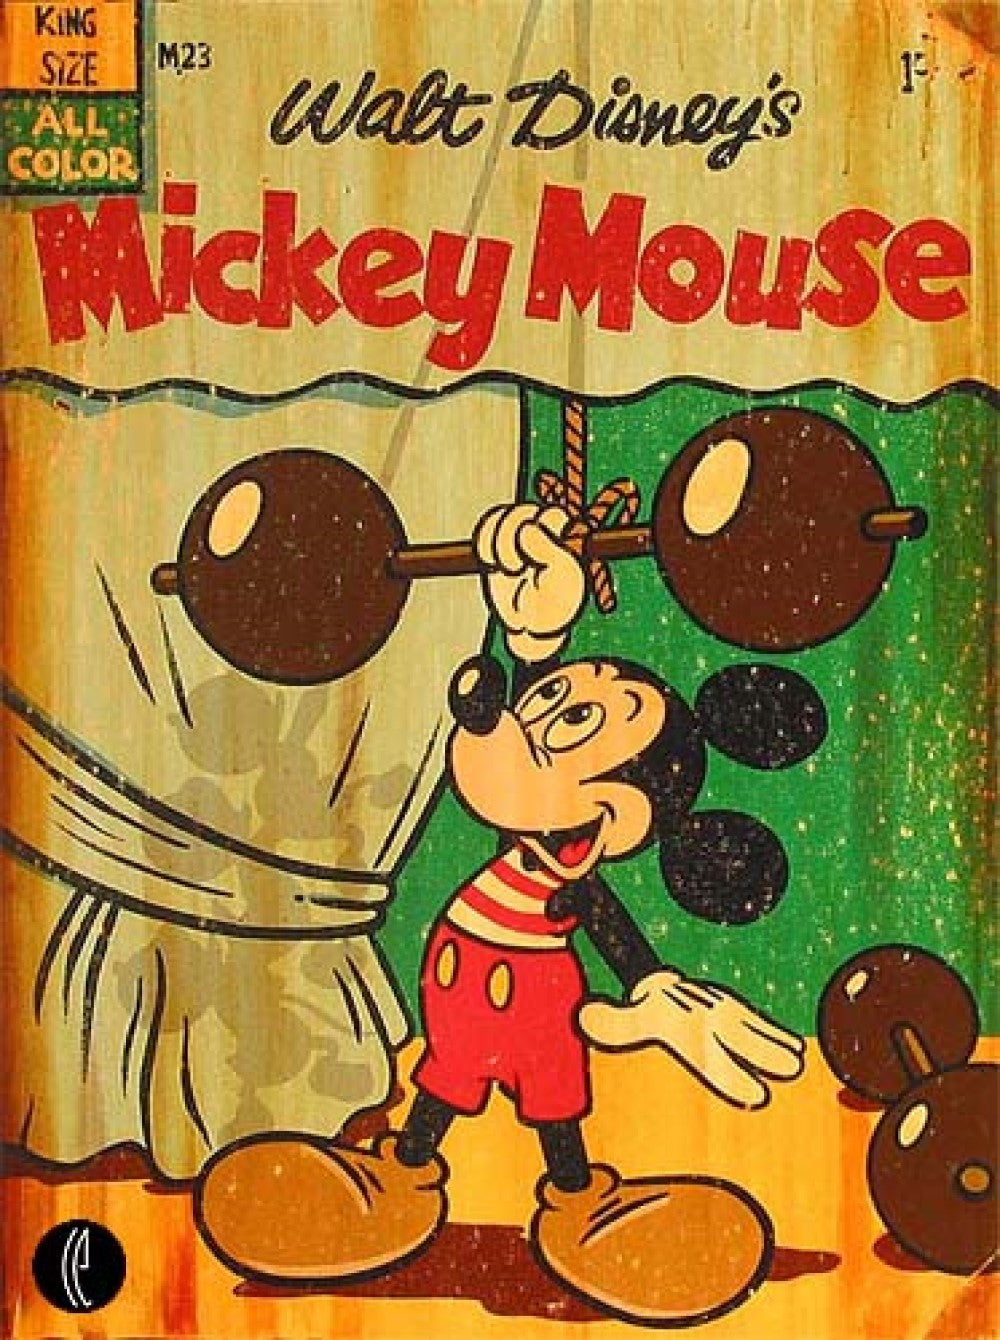 Muscle Mickey by Trevor Carlton featuring Mickey Mouse